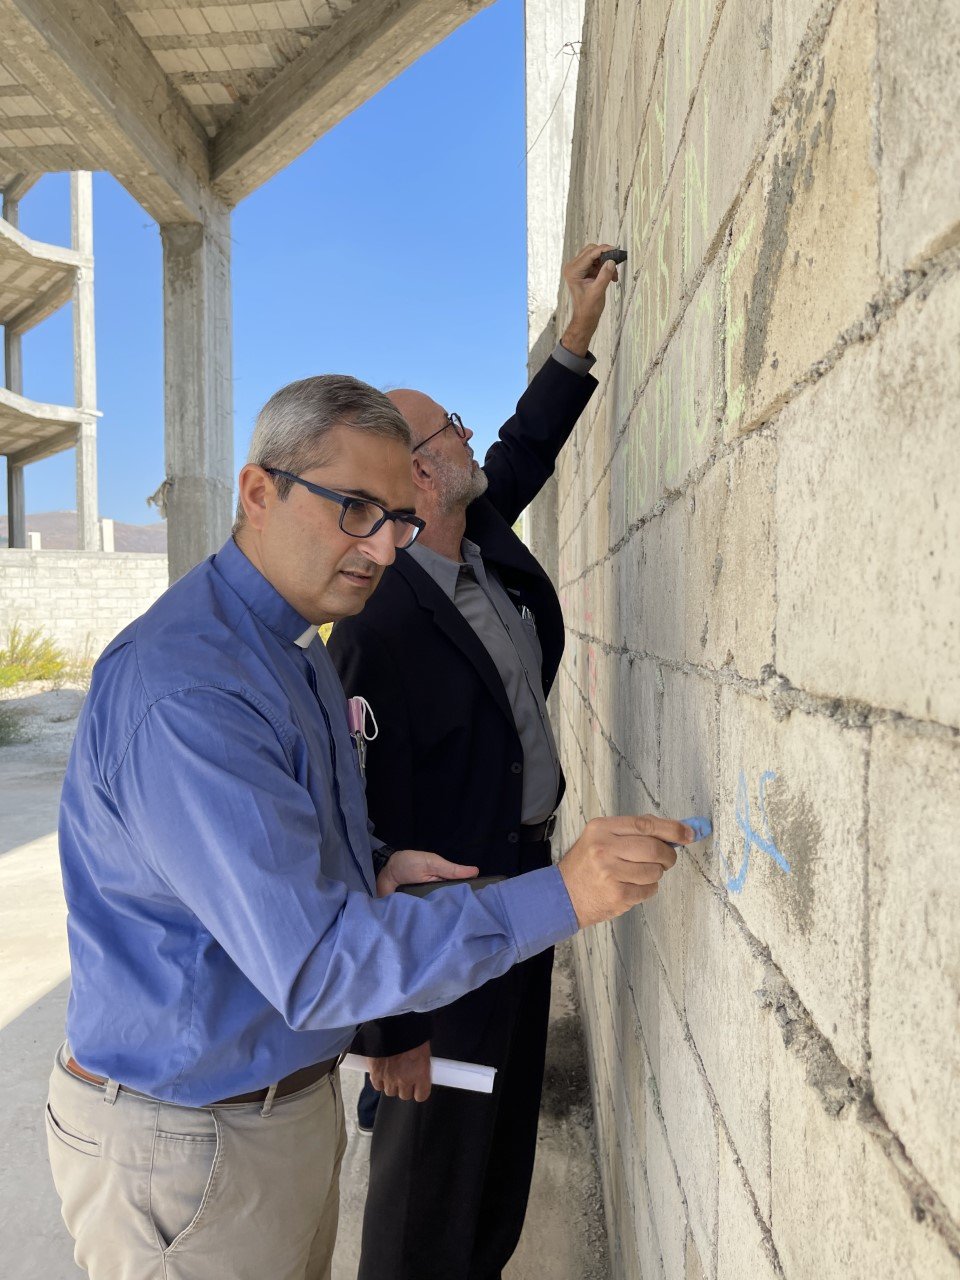  Rev Elias Jabbour, Pastor of the Presbyterian Church in Yazdia, writes a blessing on the Retreat Center walls 